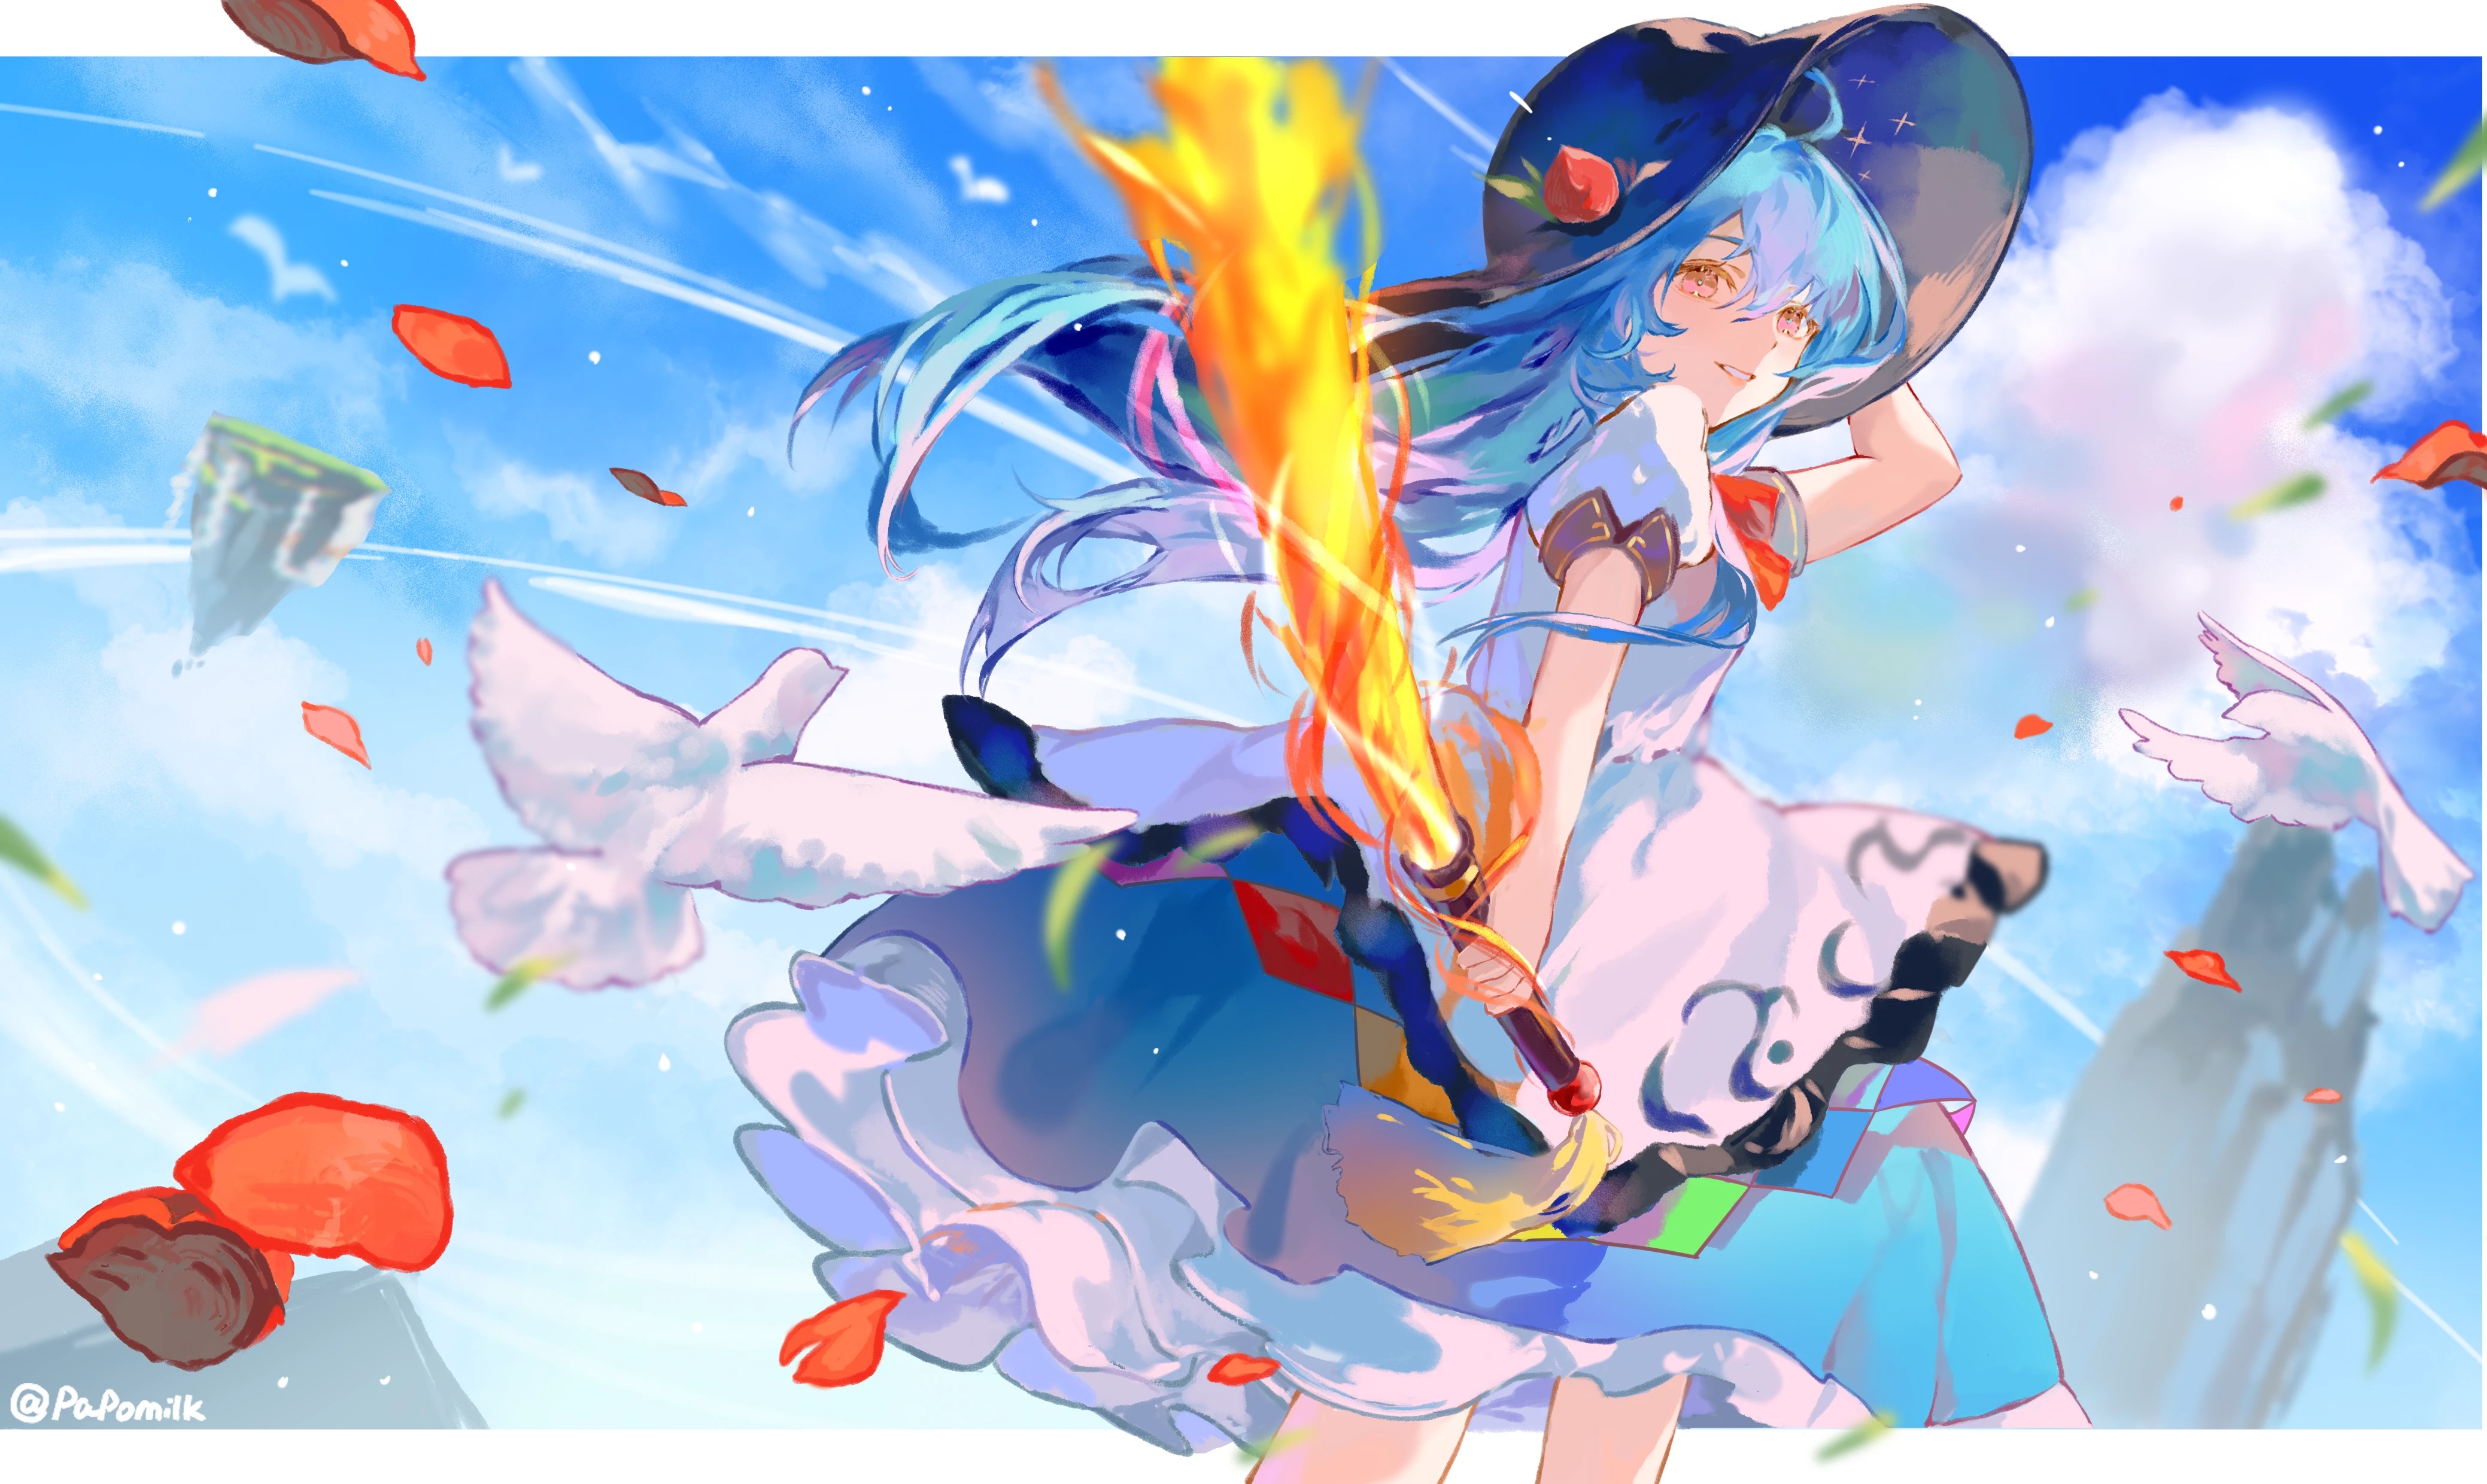 Anime Anime Girls Touhou Hinanawi Tenshi Blue Hair Long Hair Hair Blowing In The Wind Wind Clouds Sk 4155x2480